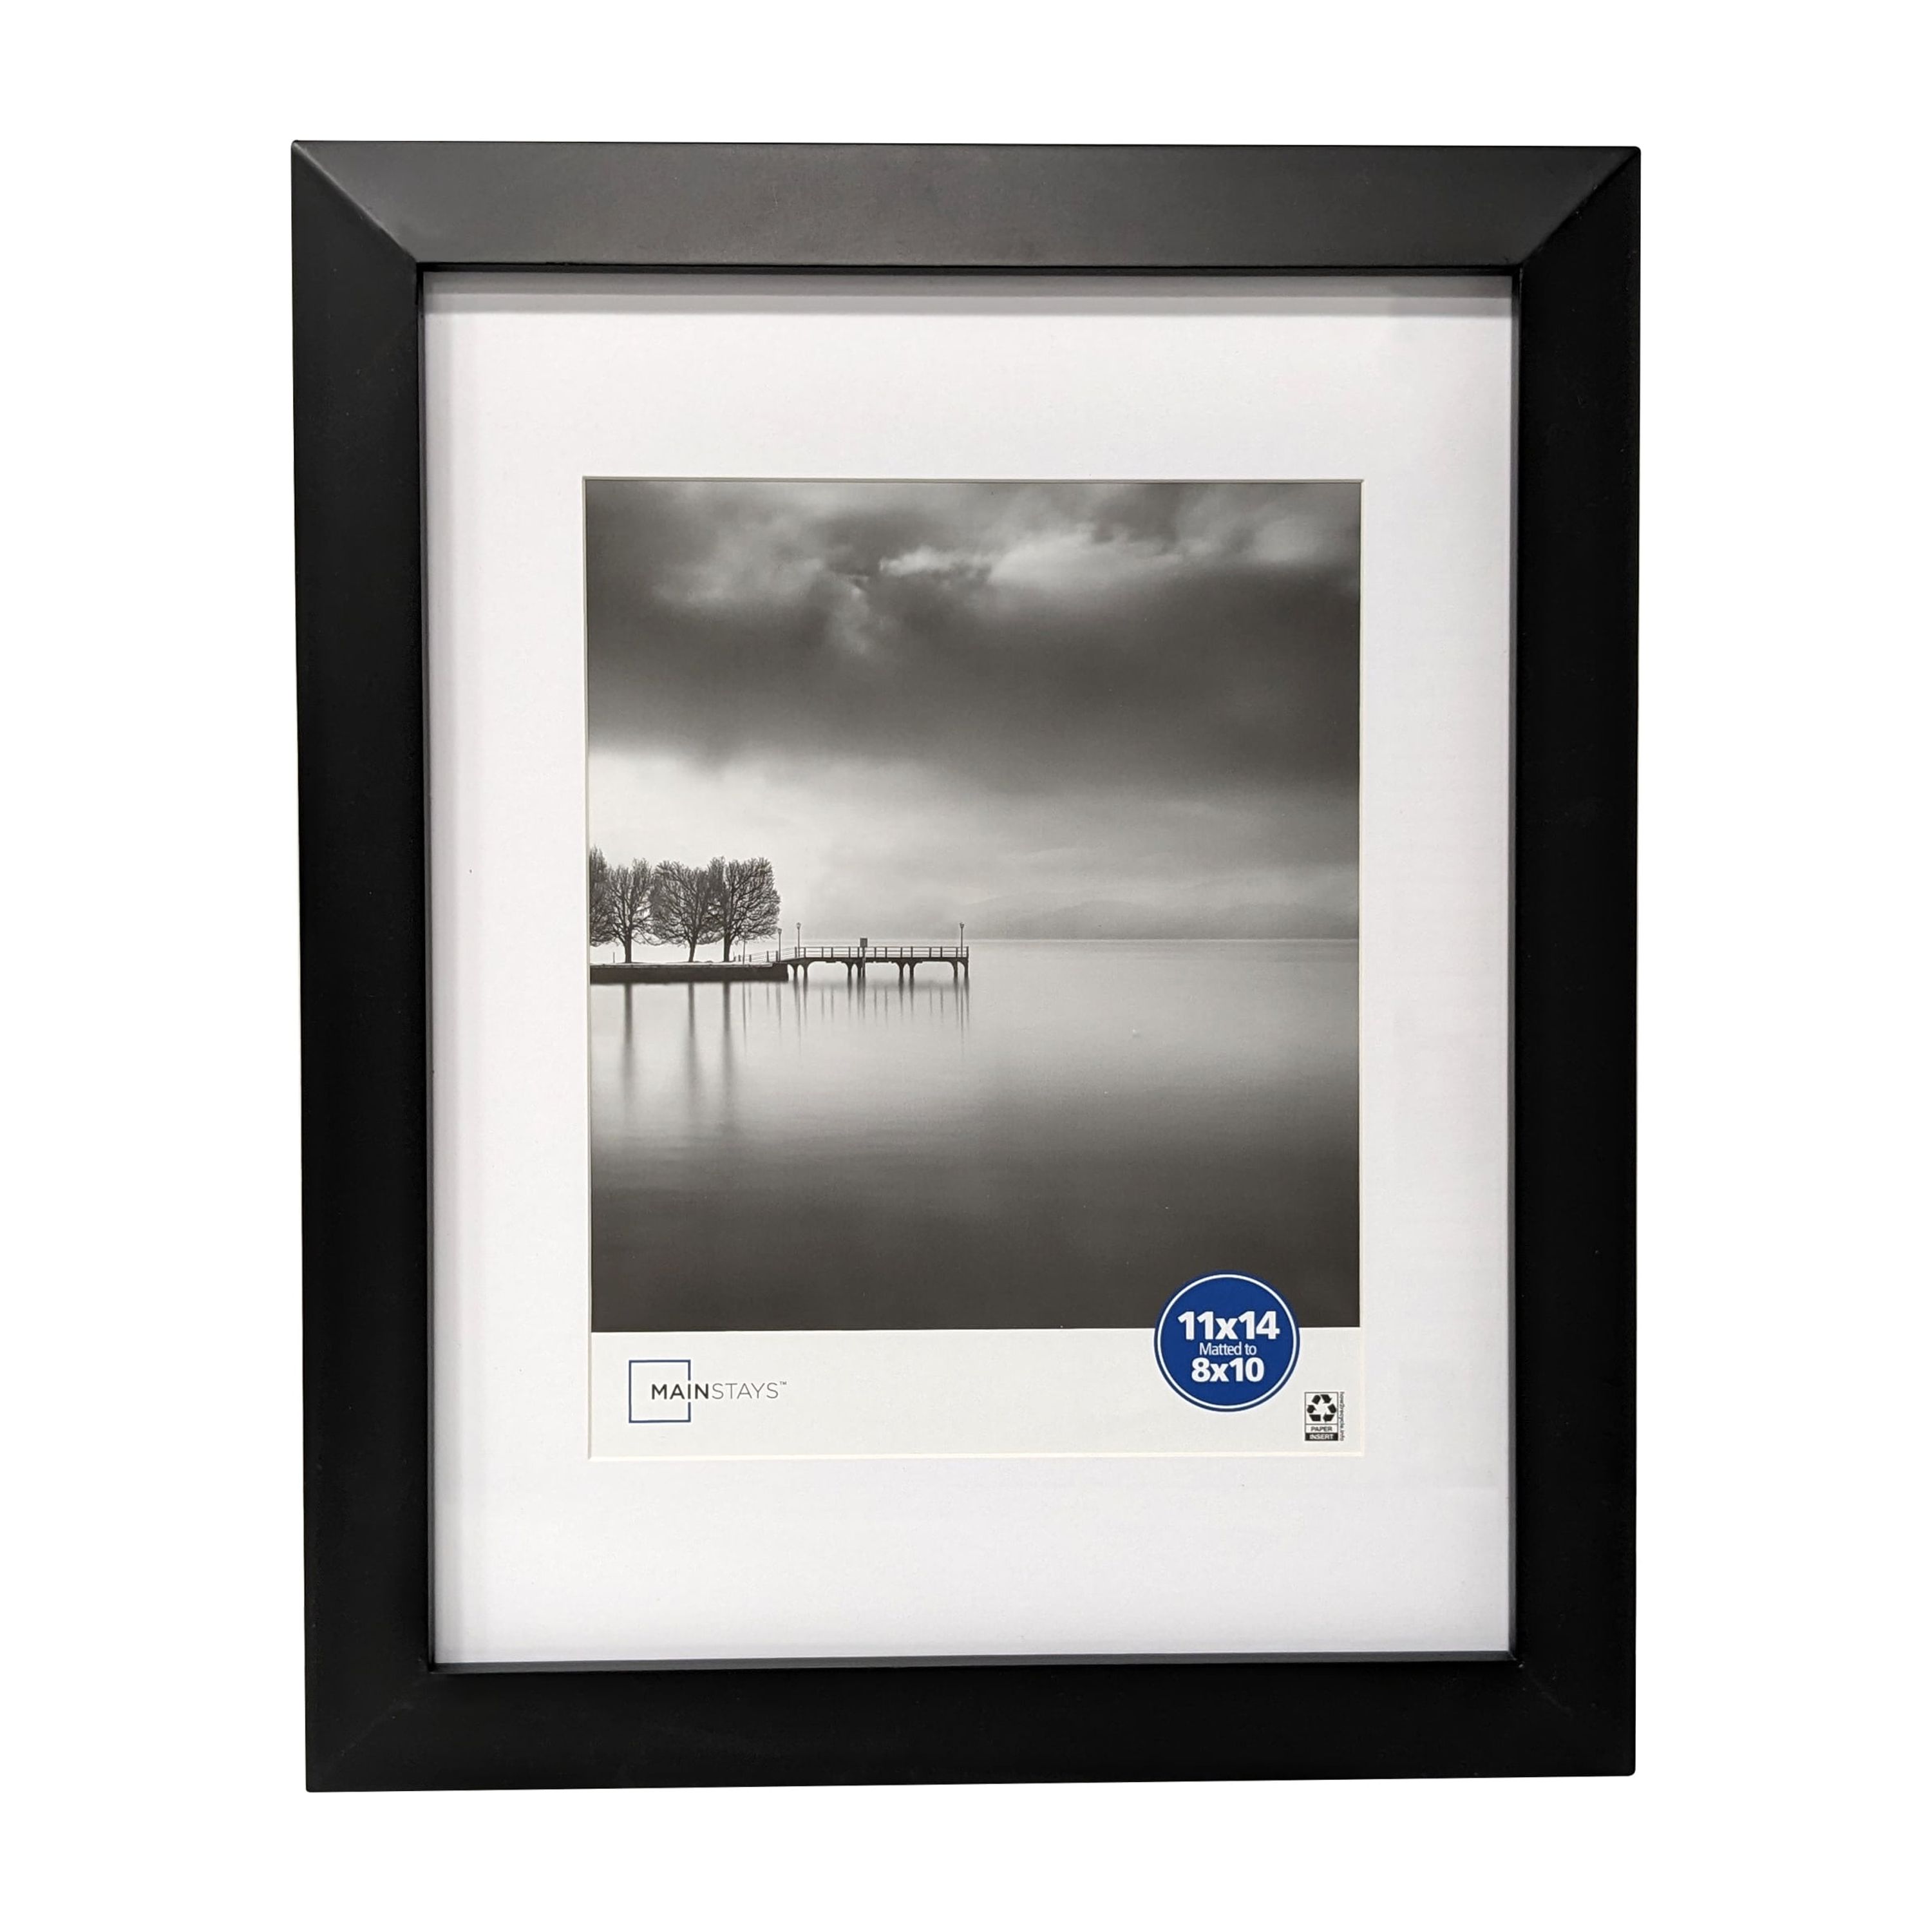 Mainstays 11x14 Matted to 8x10 Wide Beveled Tabletop Picture Frame, Black - image 1 of 7